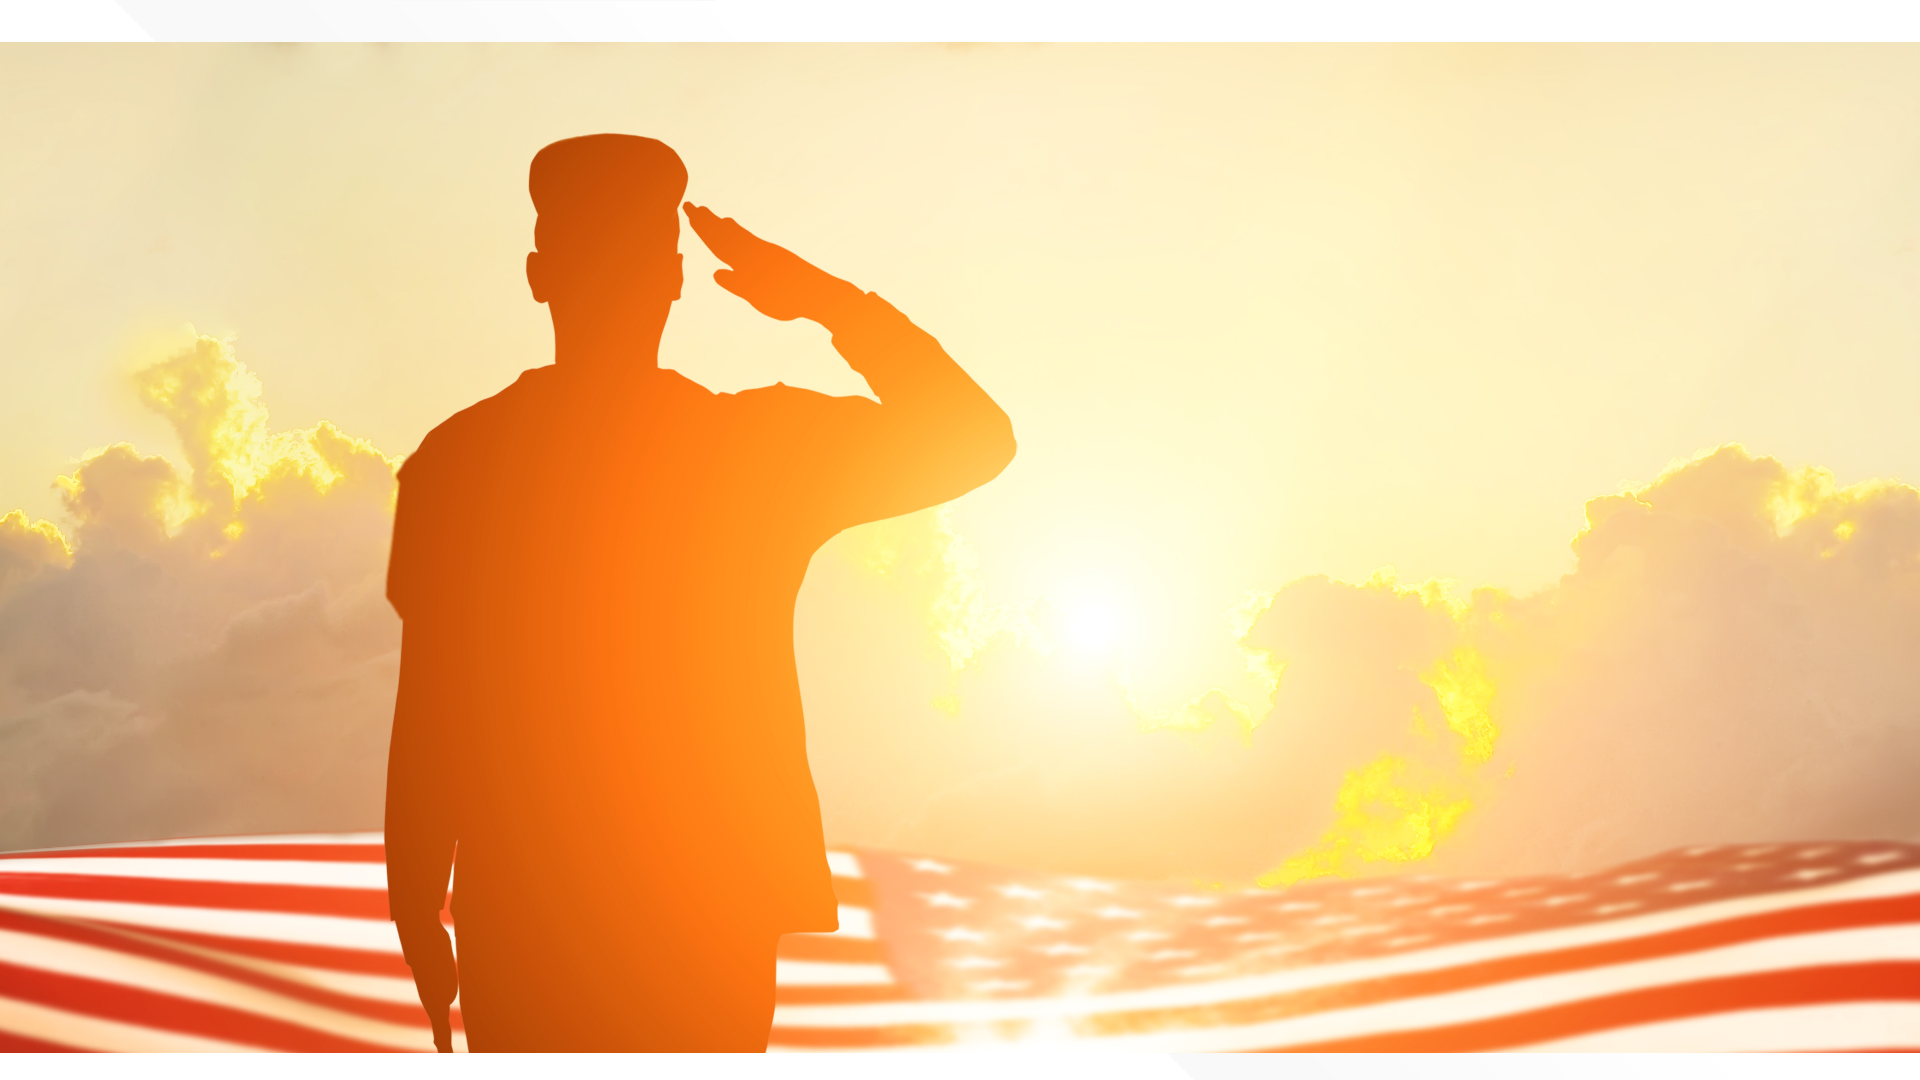 On Veterans Day, we say thank you to all who have served